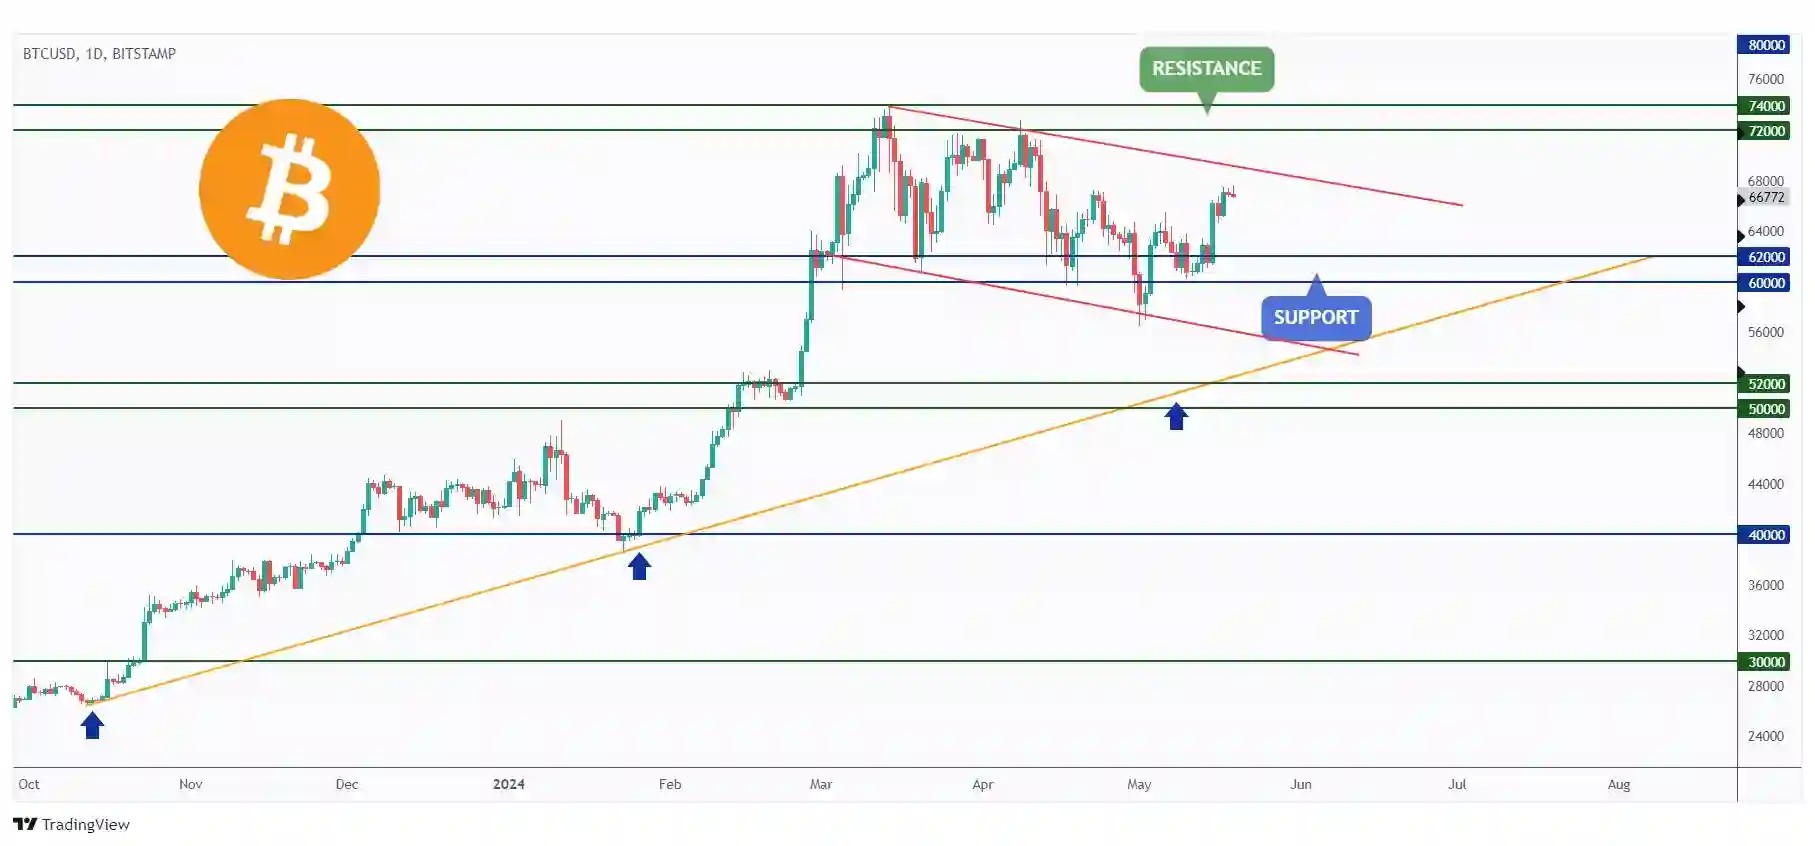 BTC daily chart overall bearish medium-term and it is currently approaching the upper bound of the channel at $69,000.